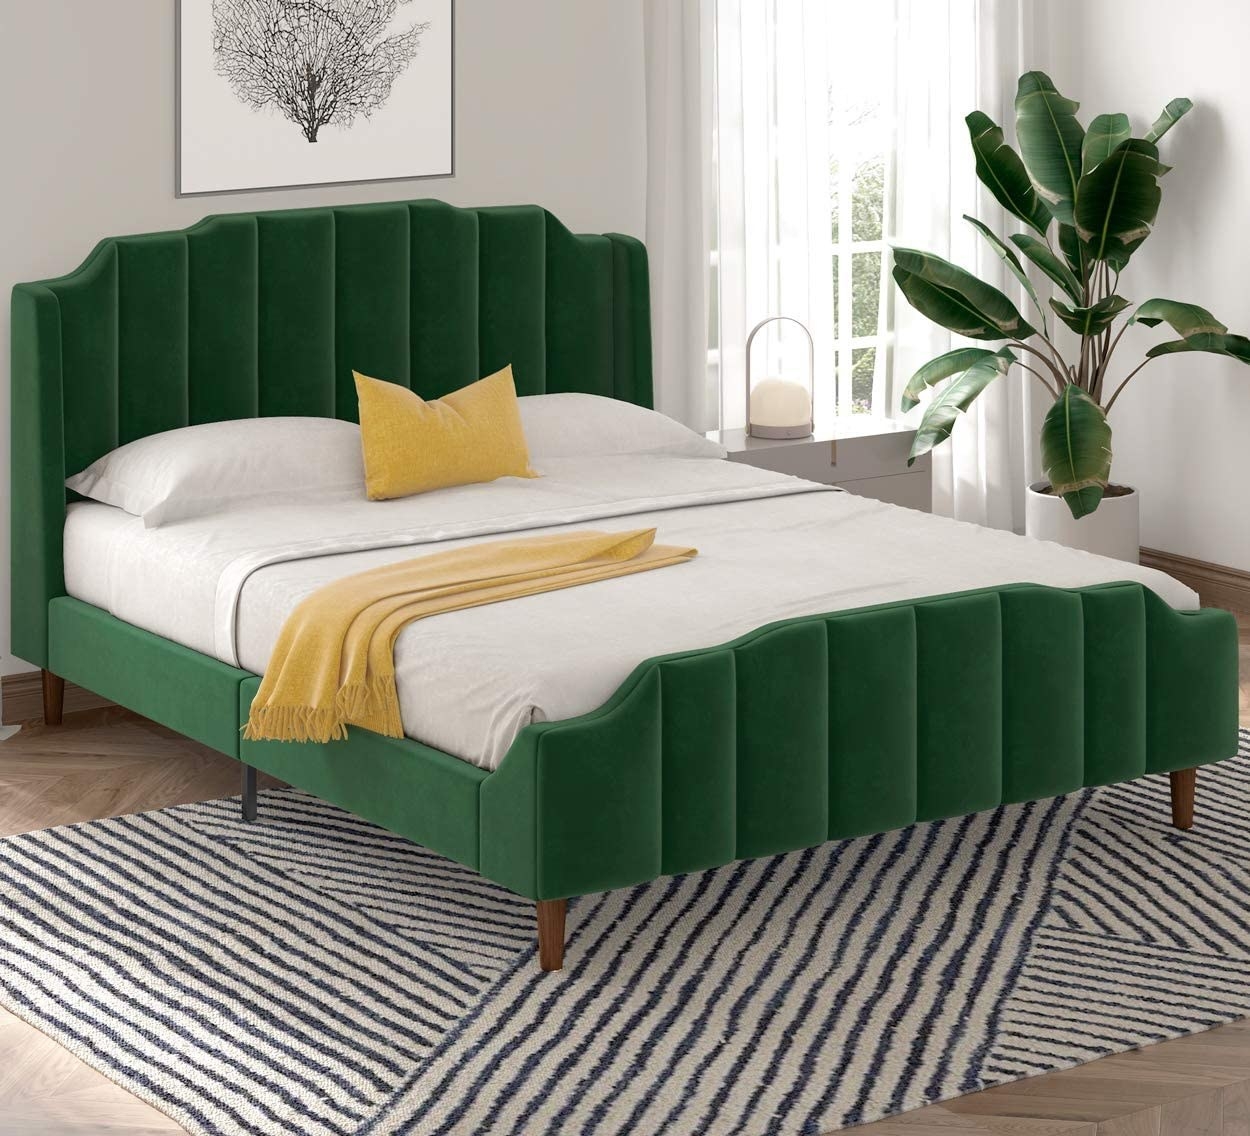 29 Bed Frames That Only Look, Average Cost Of Bed Frame Uk